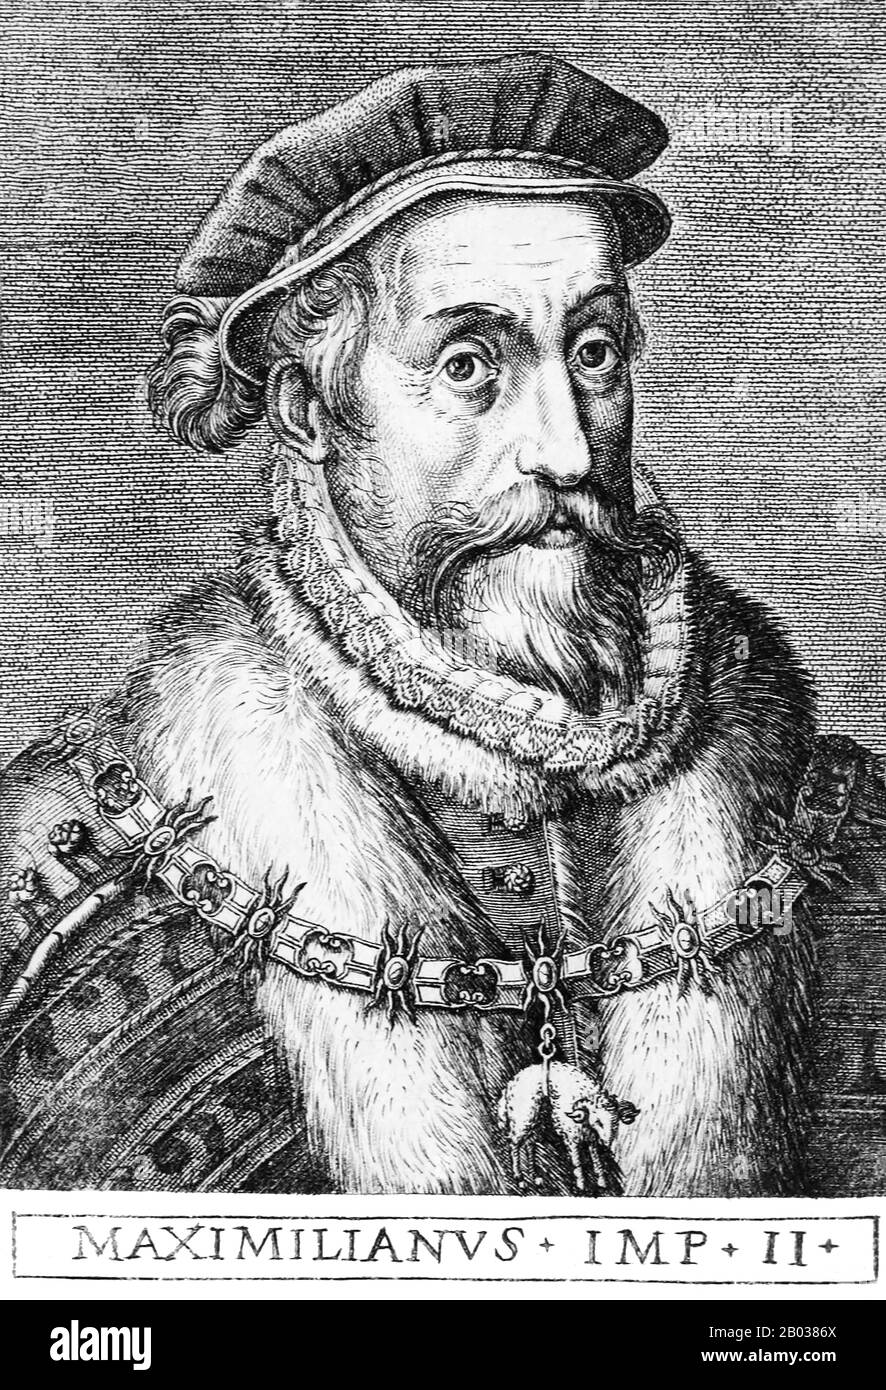 Maximilian II (1527-1576) was the son of Emperor Ferdinand I. He served during the Italian Wars in 1544, as well as the Schmalkadic War. His uncle, Emperor Charles V, made him marry his cousin and Charles' daughter Mary of Spain in 1548, and Maximilian acted temporarily as the emperor's representative in Spain. Questions of succession soon saw trouble brew between the German and Spanish branches of the Habsburg dynasty, and it was suspected that Maximilian was poisoned in 1552 by those in league with his cousin and brother-in-law, Philip II.  The relationship between Maximilian and his cousin Stock Photo